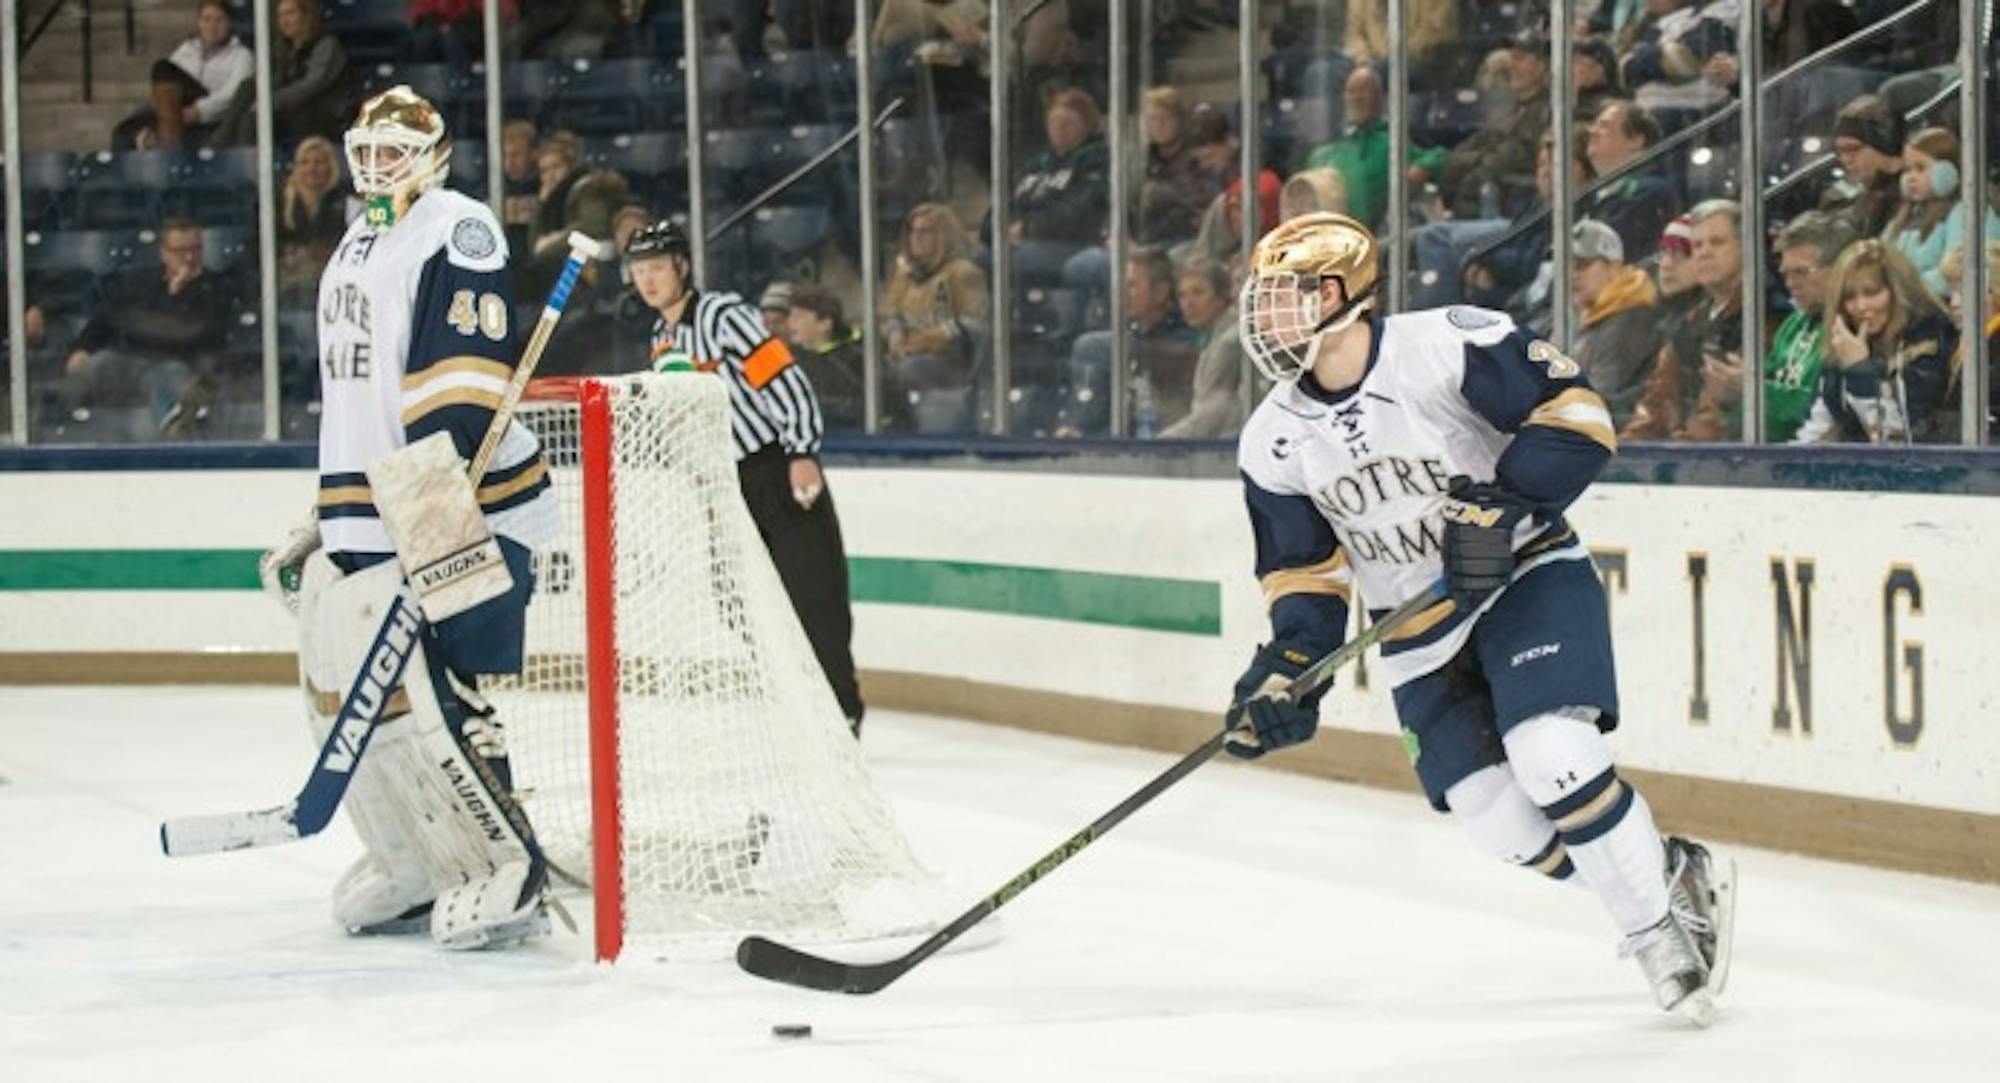 Sophomore defenseman Jordan Gross regroups behind the Notre Dame net during the 3-2 Irish victory over Northeastern on Nov. 12 at Compton Family Ice Arena. Gross had four shots in Friday’s tie.